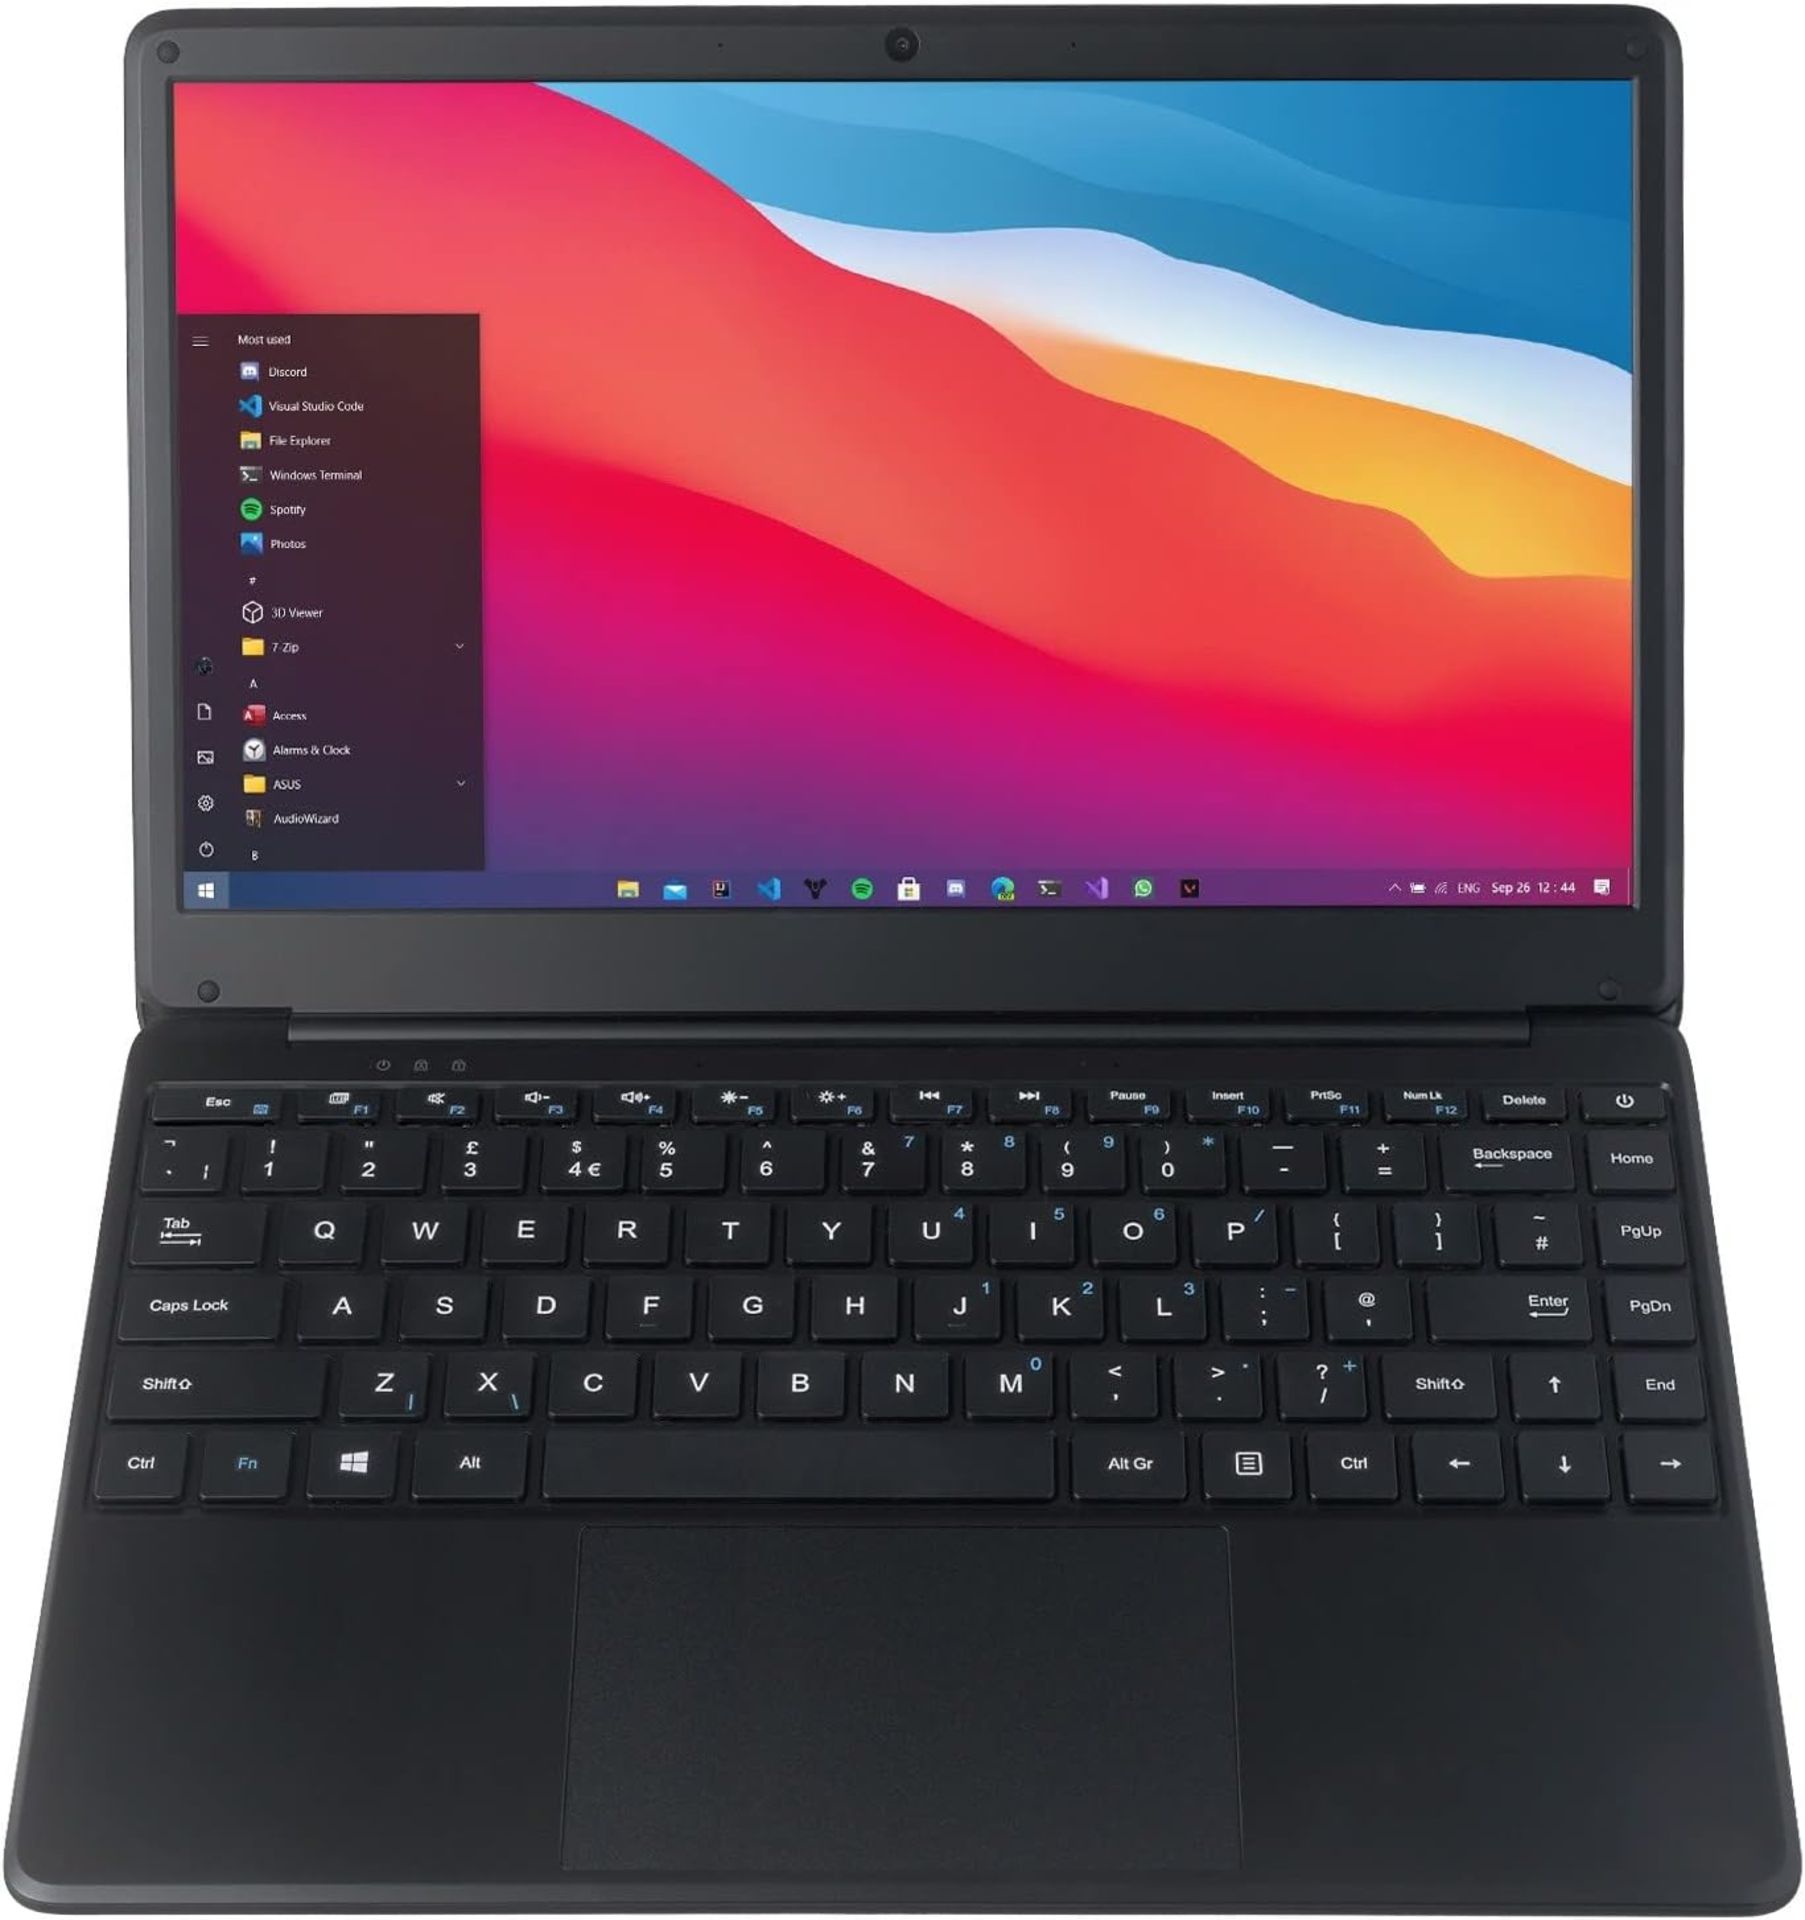 NEW & BOXED CODA 1.4 CODA043 14 Inch Laptop. RRP £199.99. (SR). Operating system Windows 10S, SSD - Image 4 of 7